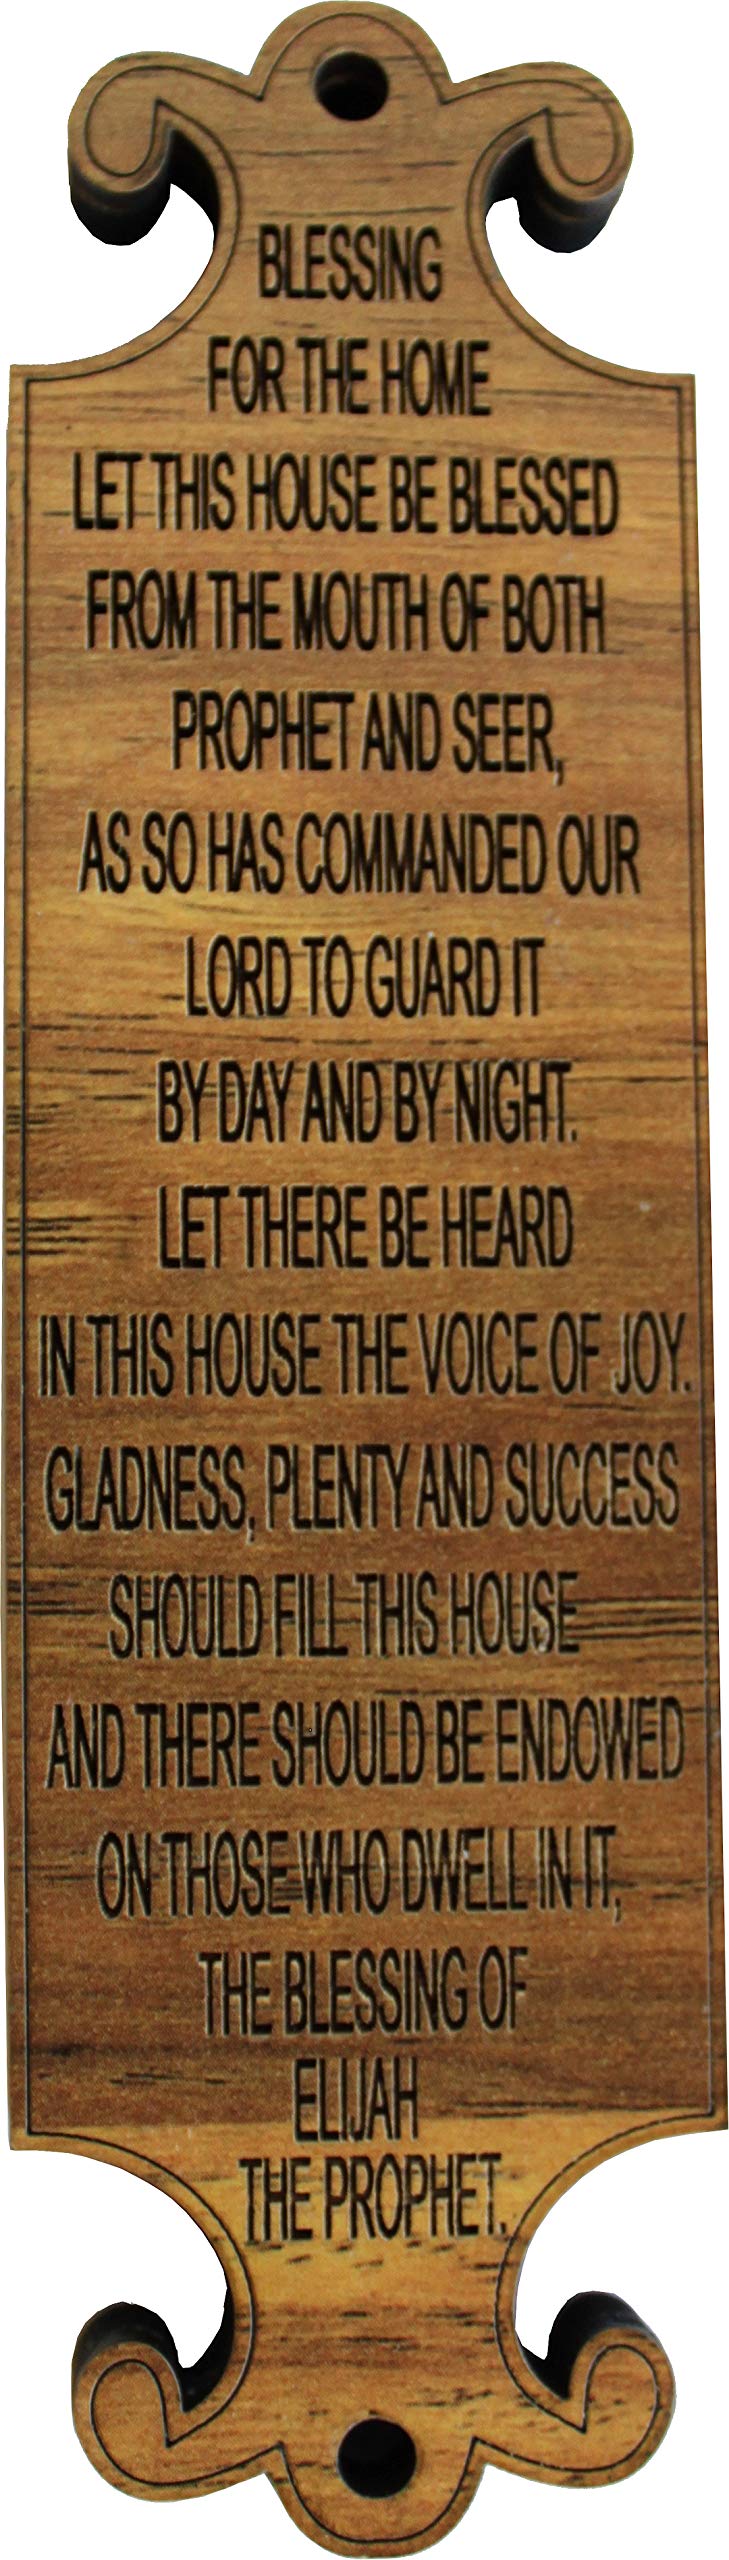 Holy Land Market Elijah The Prophet Home House Blessing Mezuzah - with mounting Guide Card Included ( 6 x 1.5 Inches)